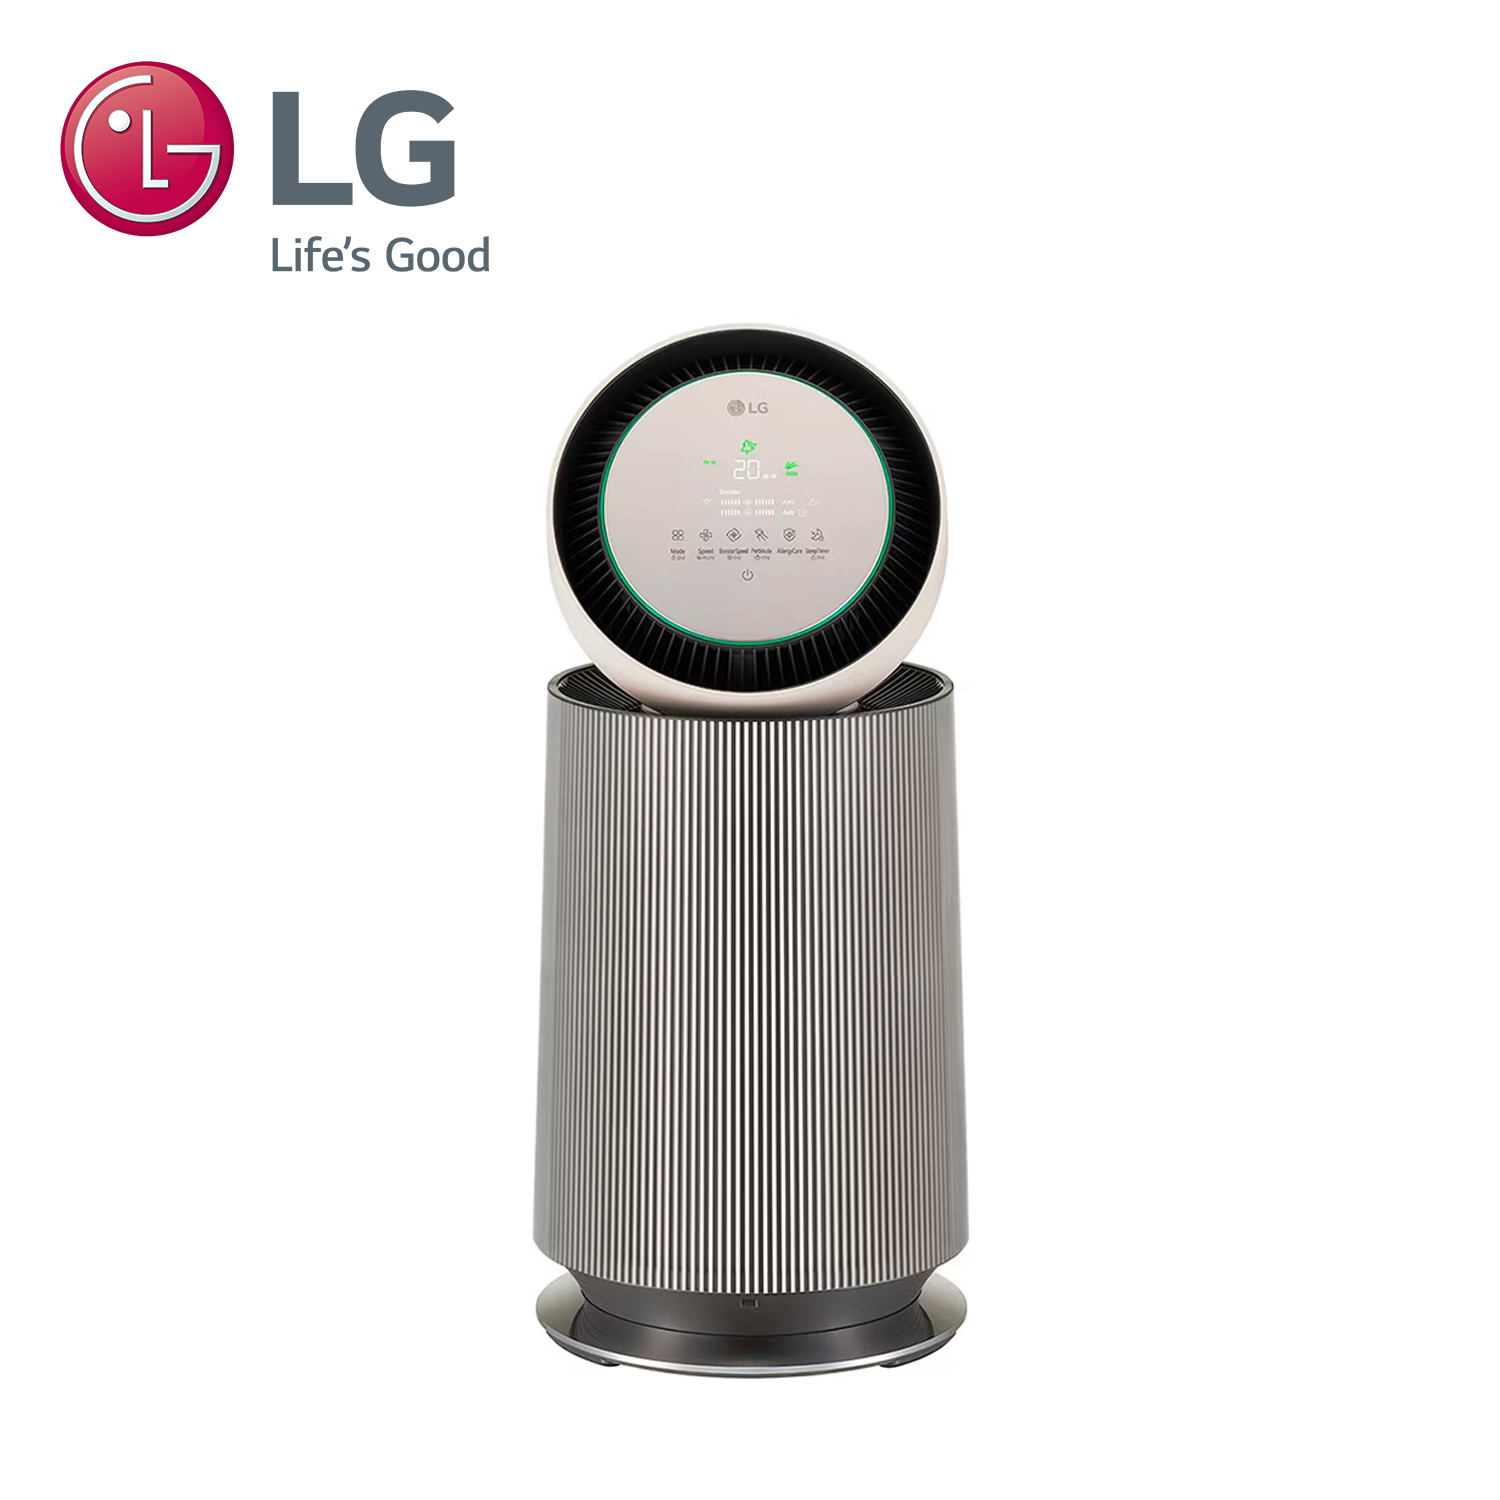 LG Air cleaner AS651DBY0, , large